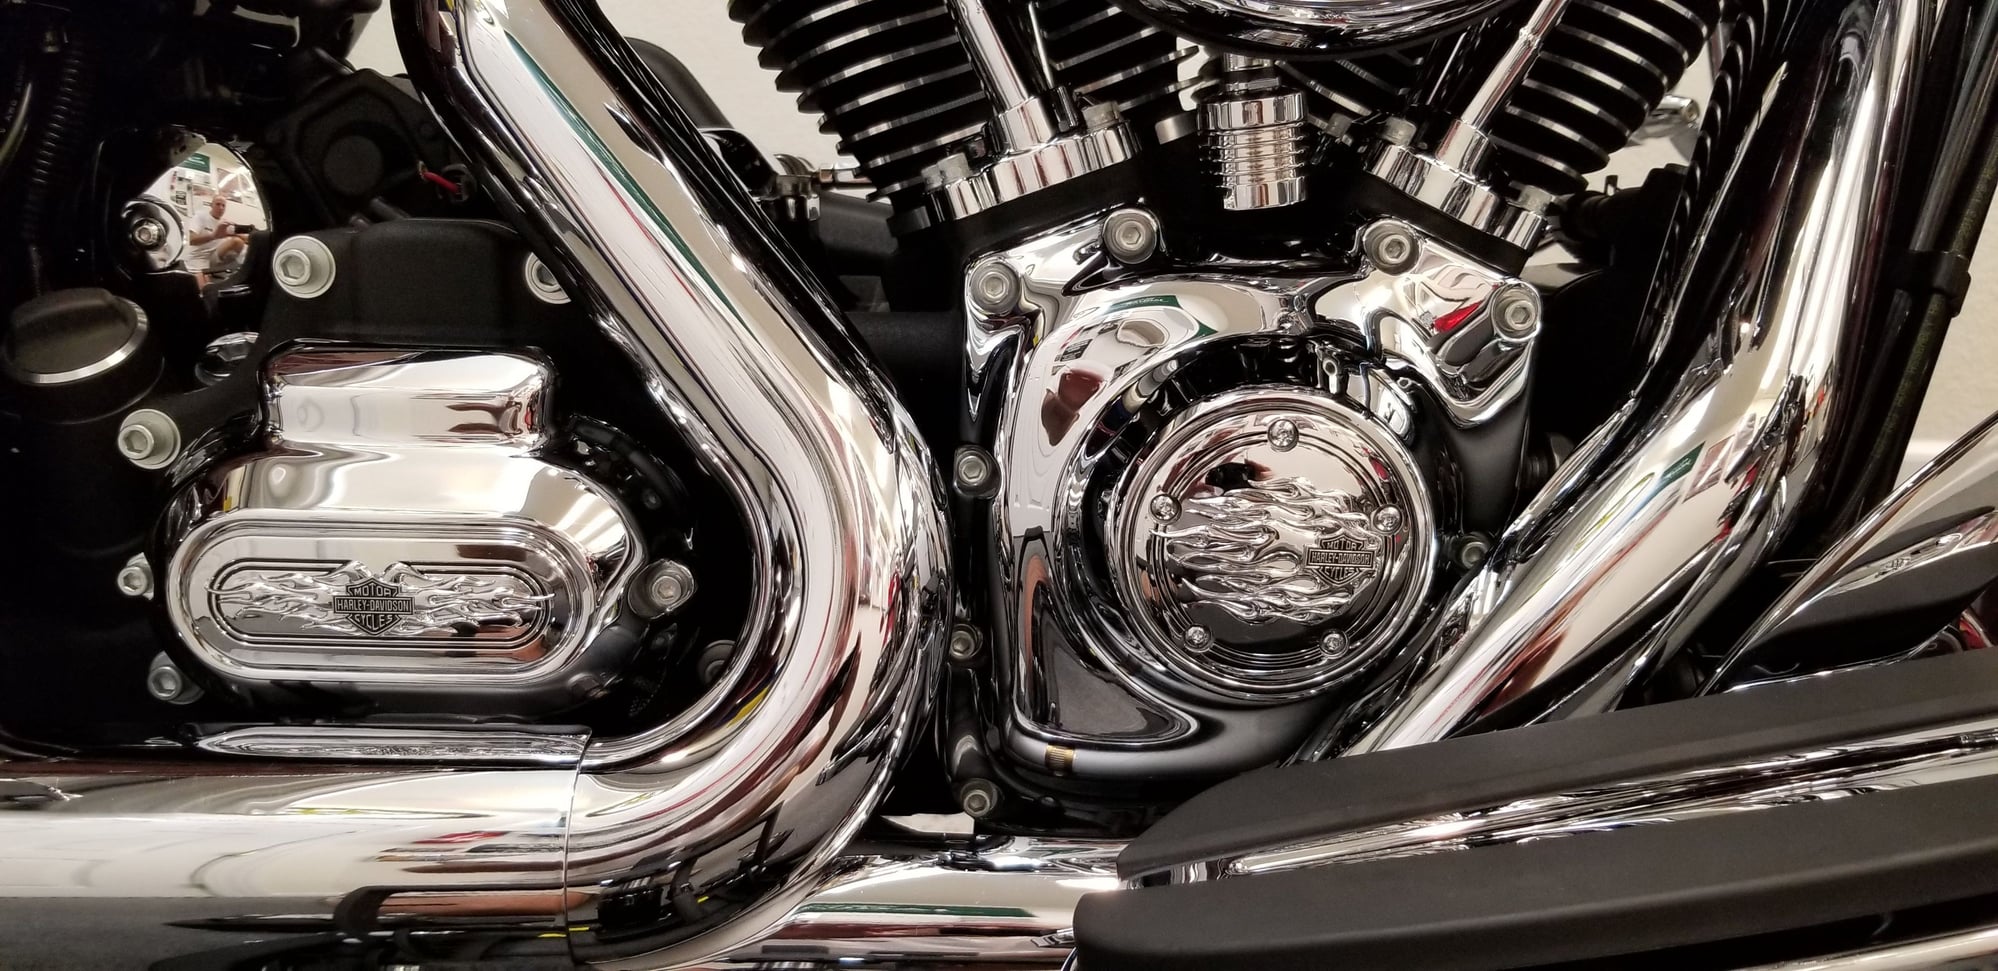 Where to Mount Oil Collector-'14 Street Glide - Harley Davidson Forums